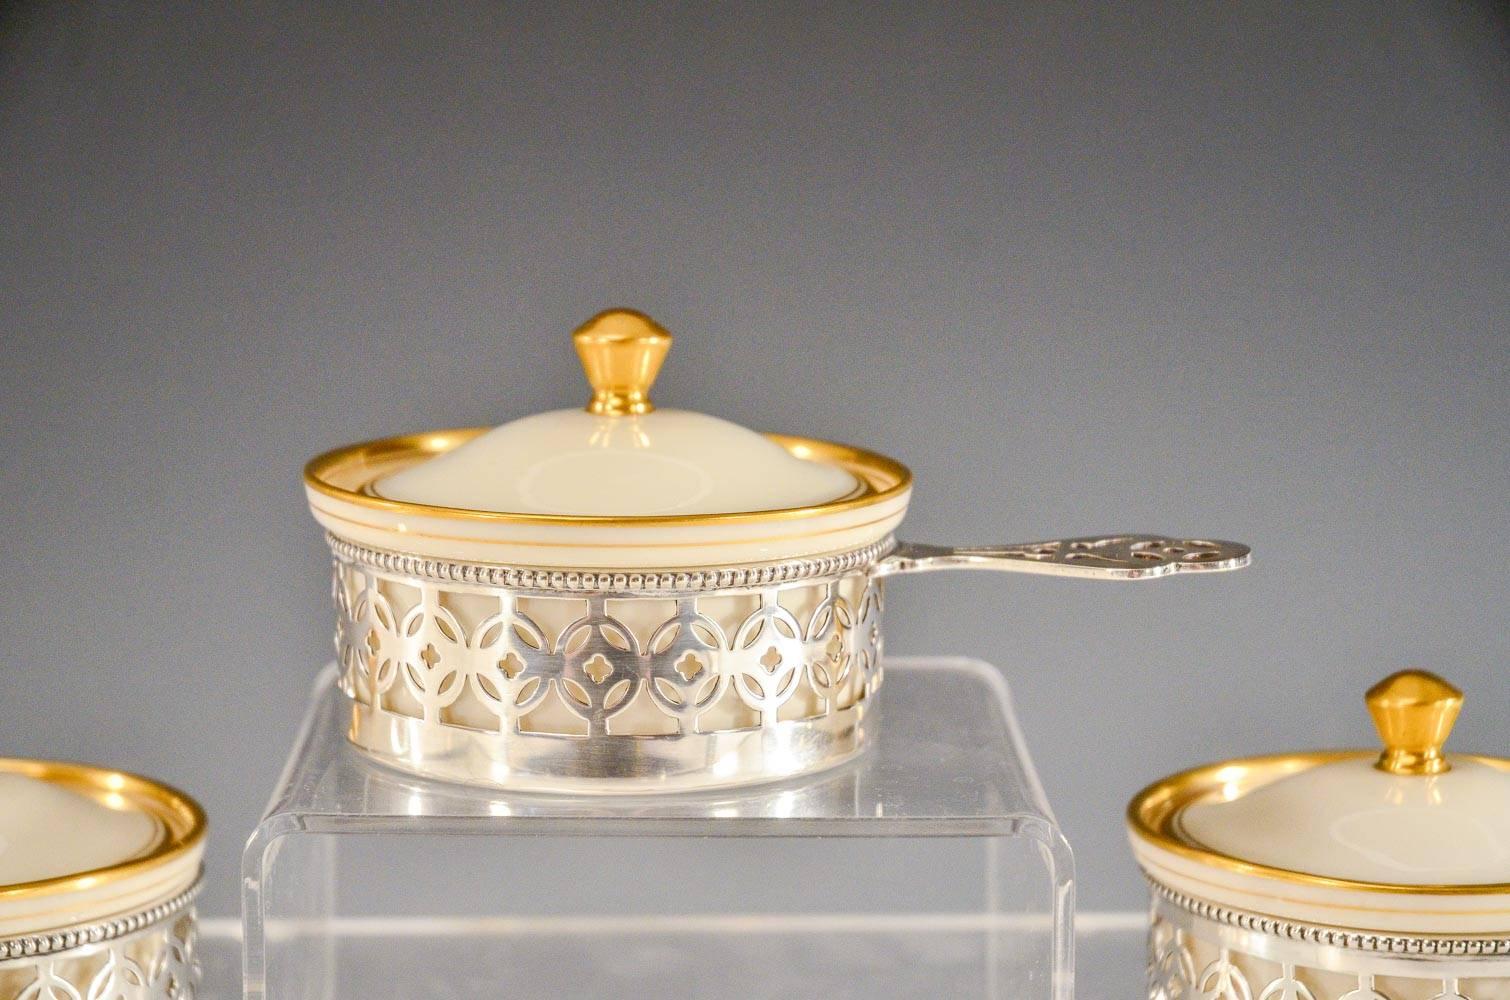 A perfect set of 12 Lenox covered ramekins ready for creme brulee, chocolate mousse or pate. Desserts, first course, these create a lovely presentation with simple and elegant ivory and gold porcelain ramekins that sit neatly in the sterling silver